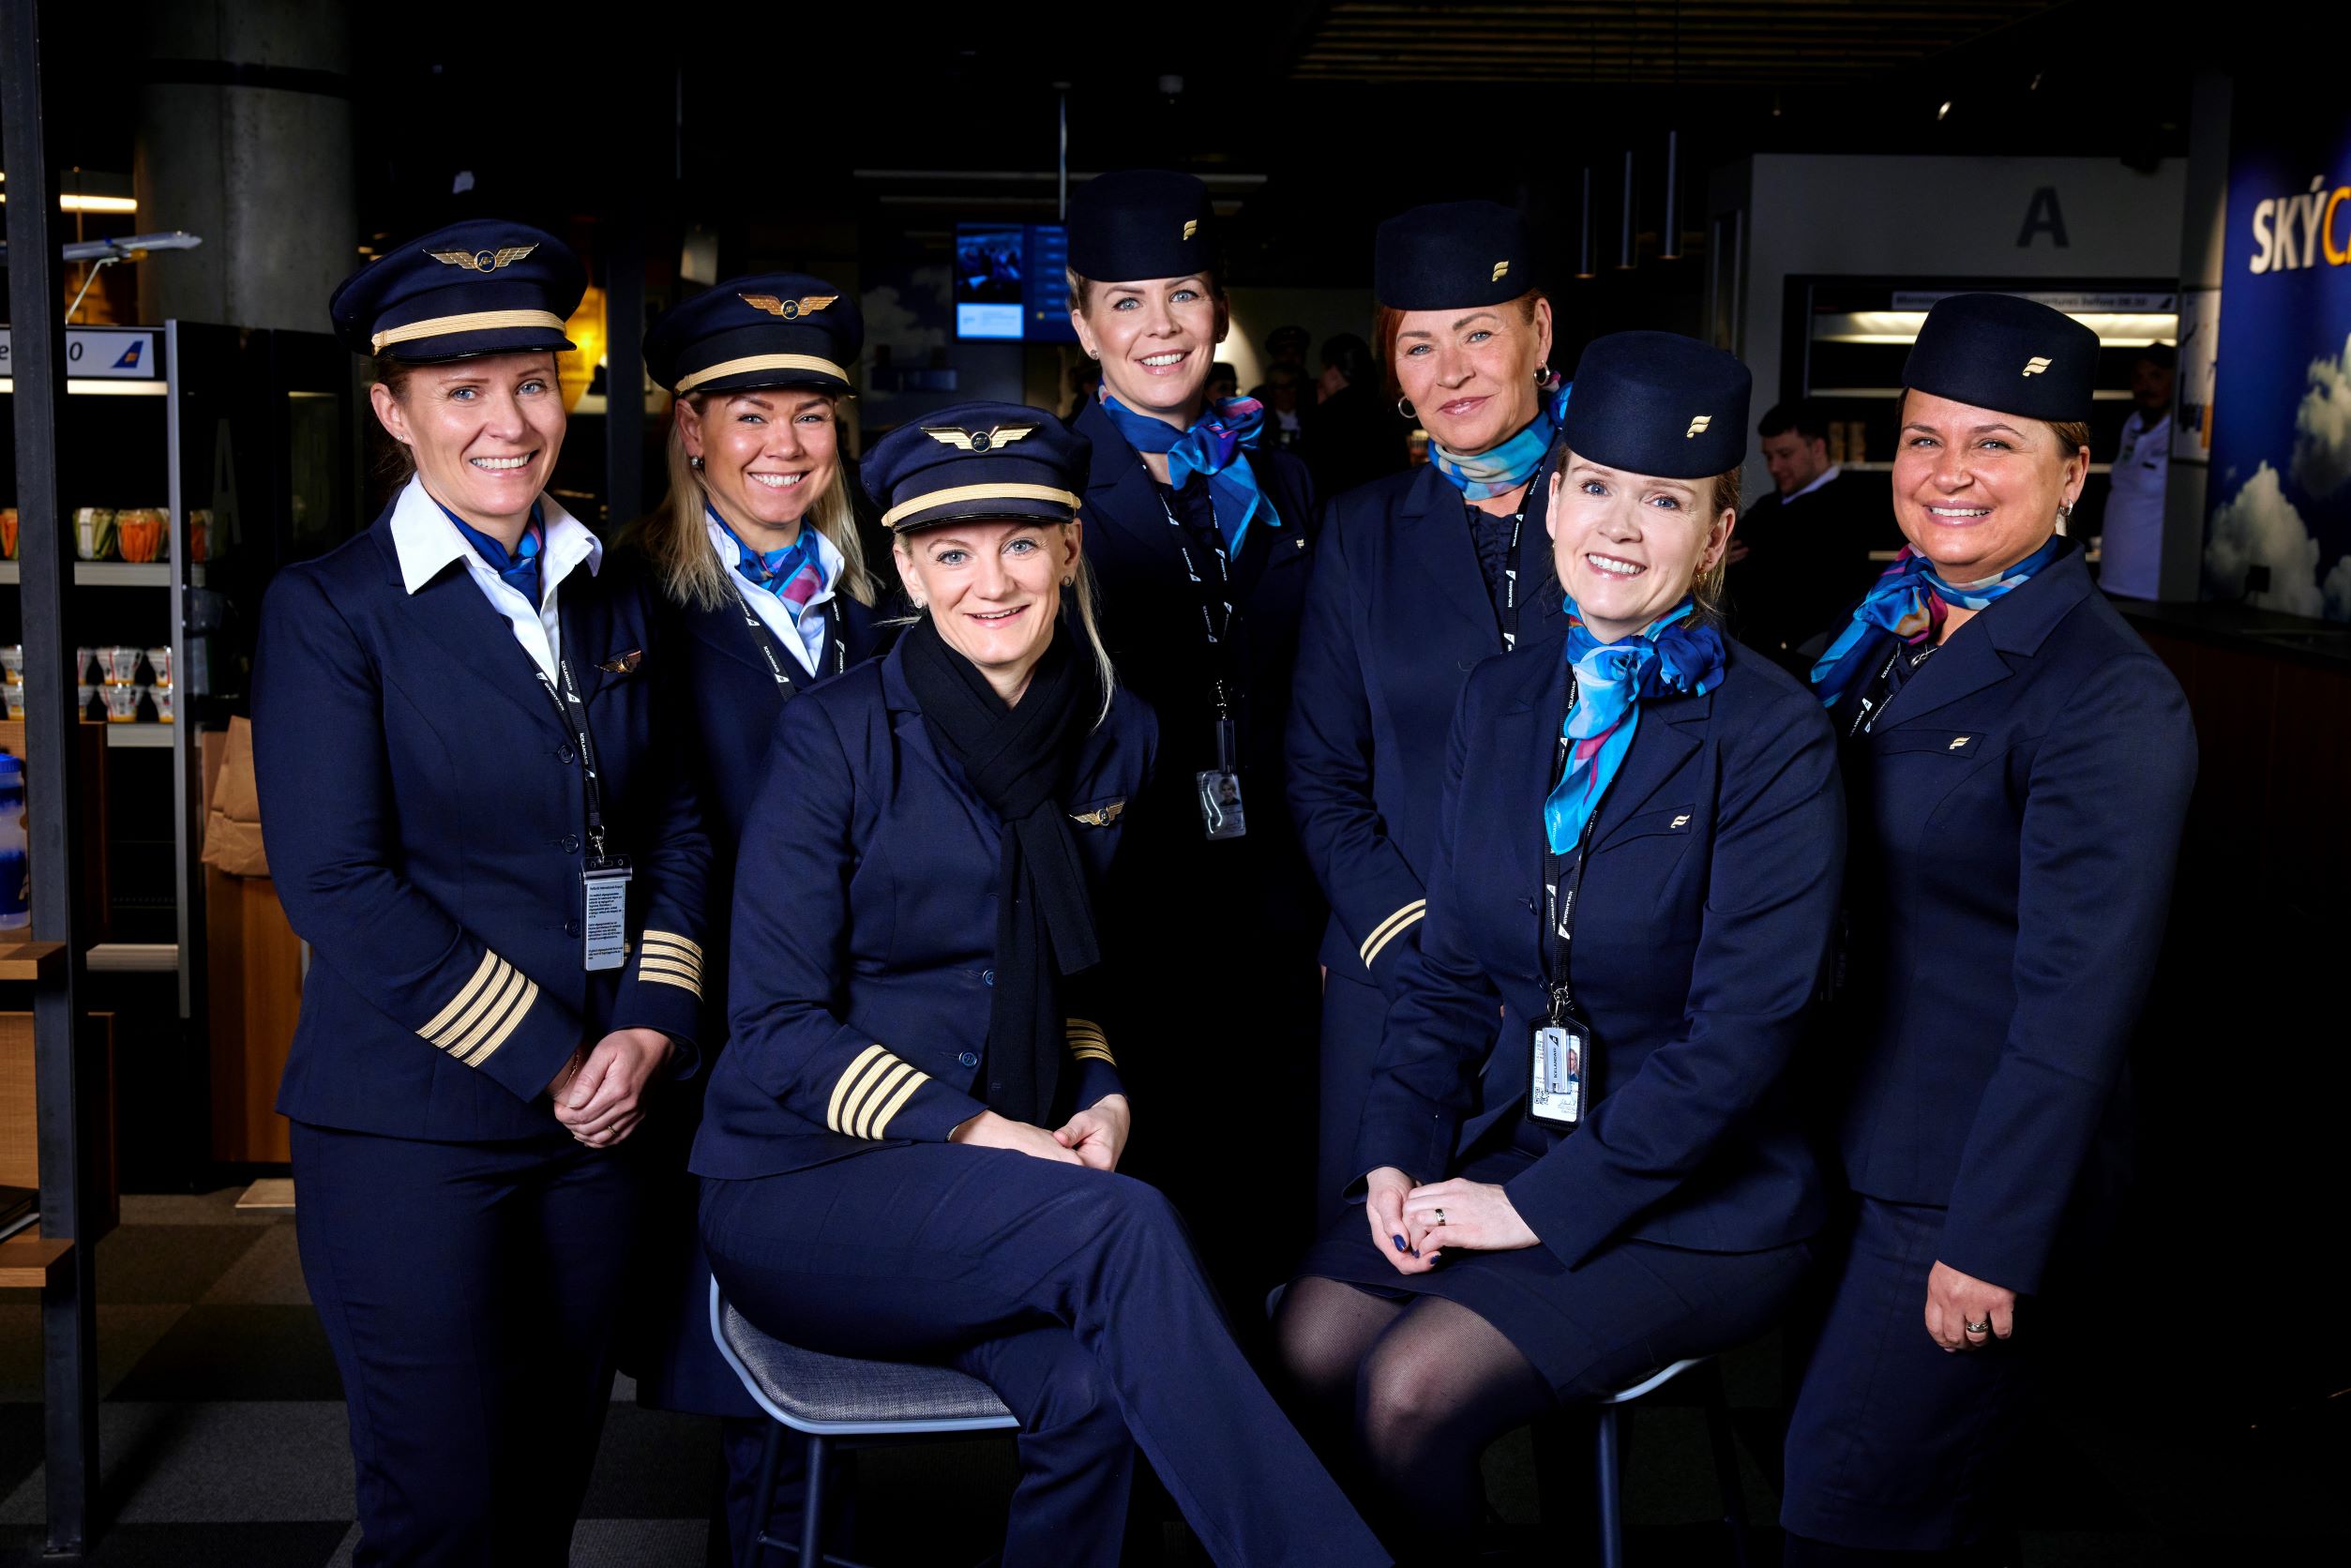 On International Women's Day 2022, we flew a flight with all-female staff of cabin crew, pilot, co-pilot, and gate agents. The photo shows the team